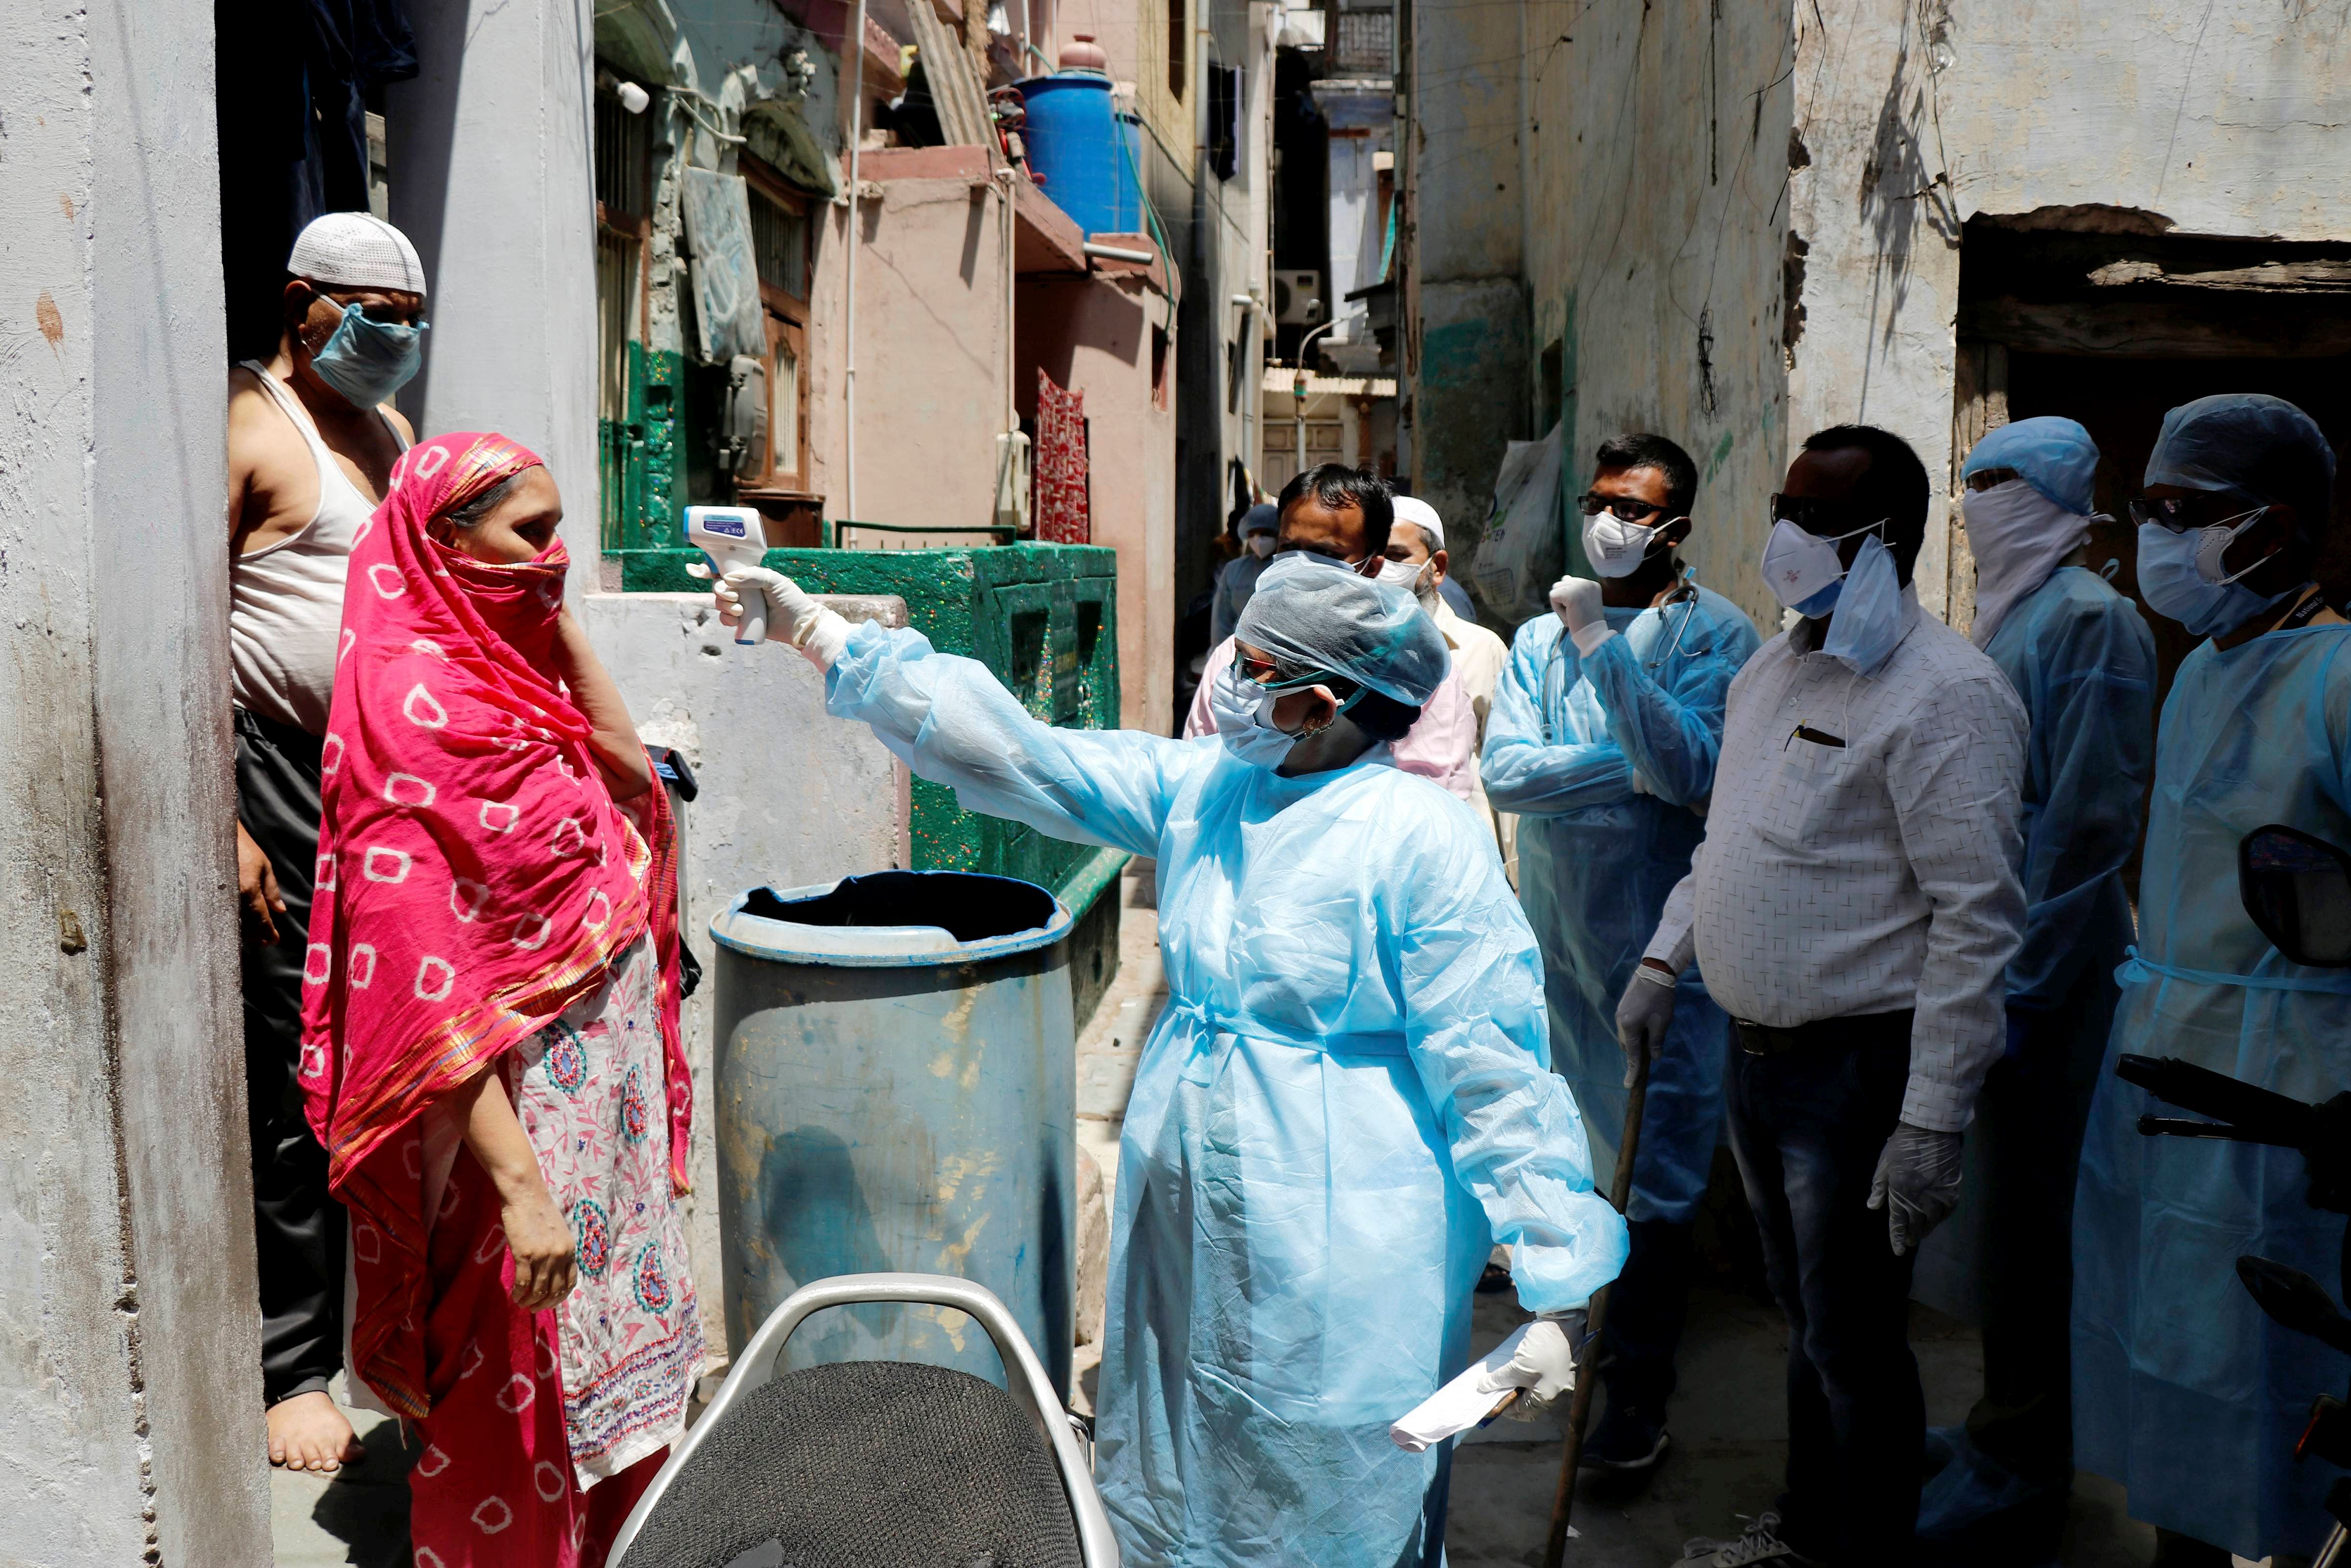  A medical team conducts door-to-door survey to screen people for COVID 19 symptoms, during the nationwide lockdown imposed in wake of the coronavirus outbreak. (PTI Photo)